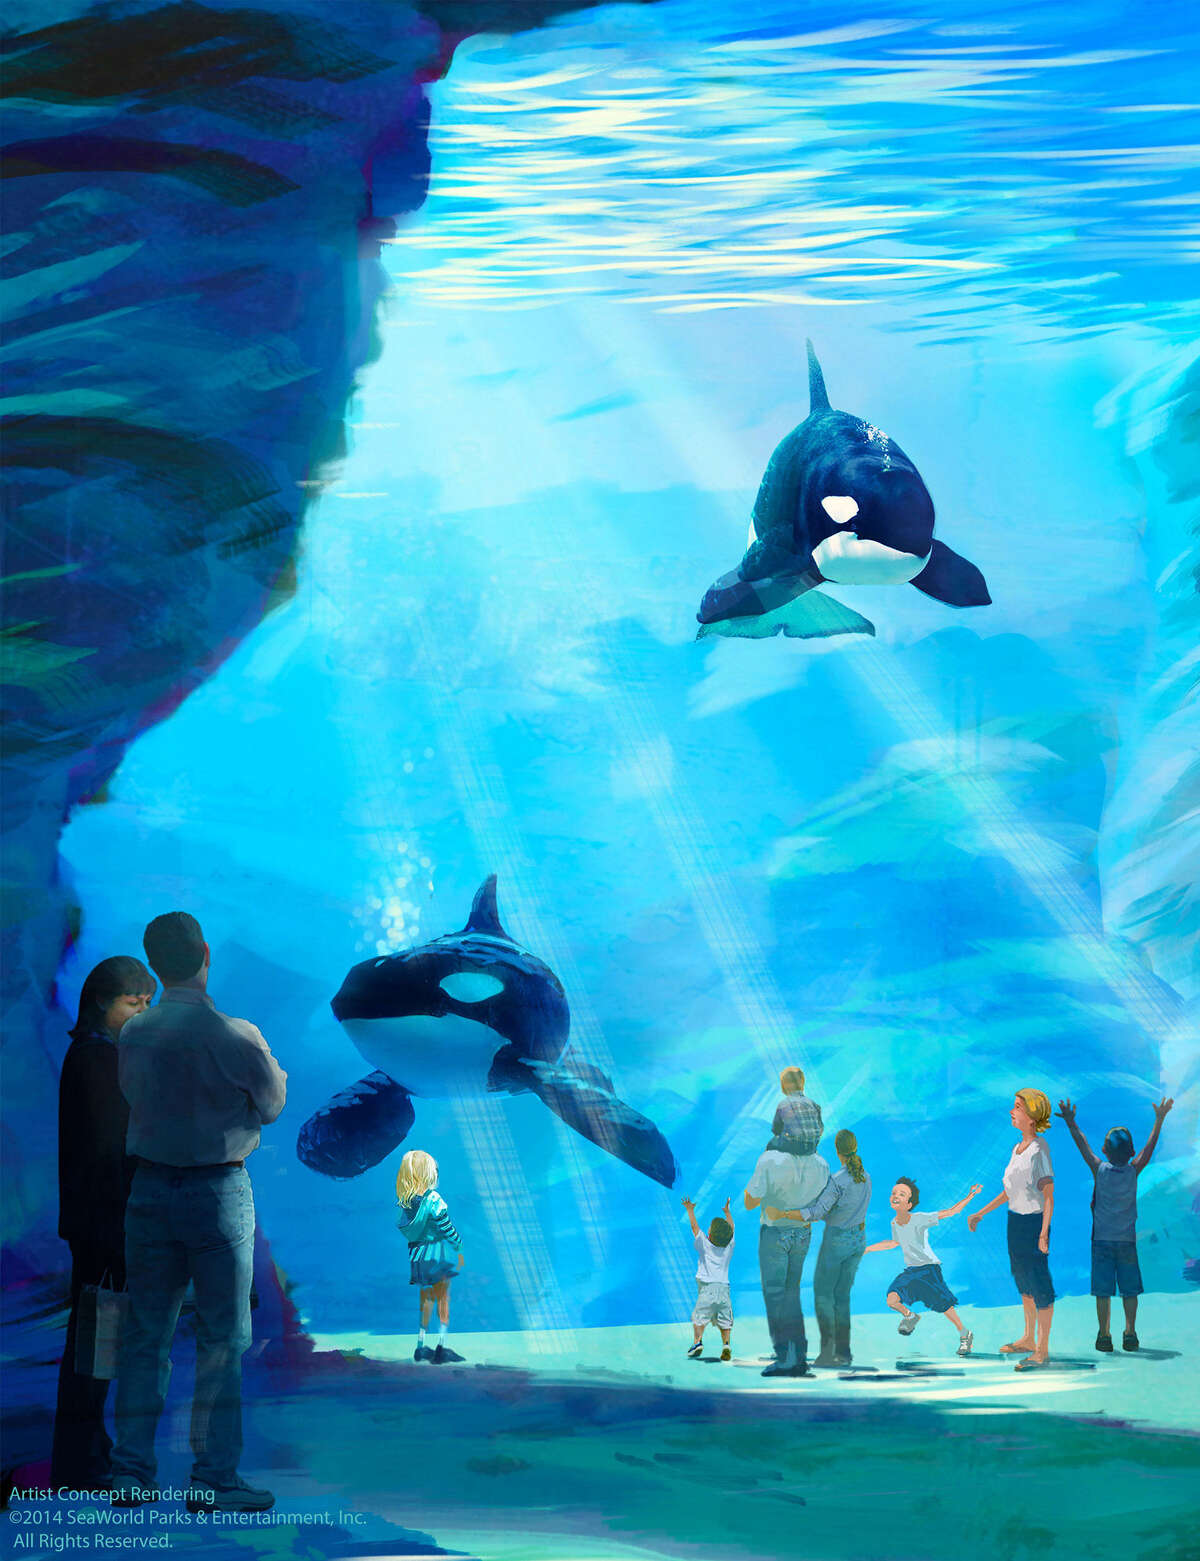 SeaWorld plans to build new killer whale, sea lion and dolphin habitats at its parks in San Antonio, San Diego, Calif., and Orlando, Fla.